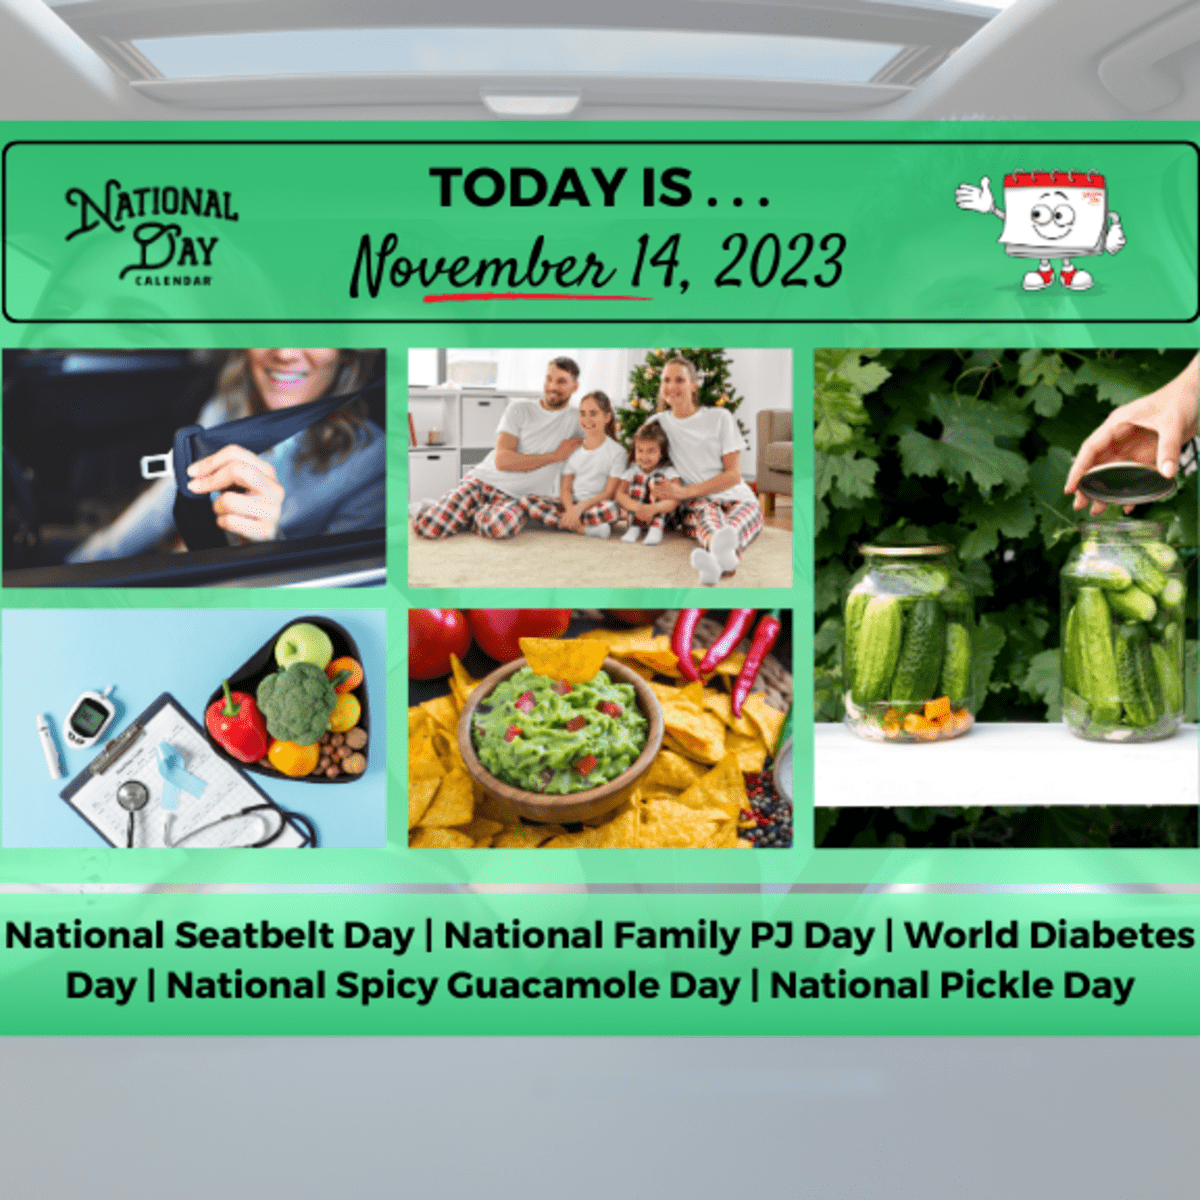 NOVEMBER 14, 2023, NATIONAL SPICY GUACAMOLE DAY, NATIONAL FAMILY PJ DAY, NATIONAL PICKLE DAY, NATIONAL SEAT BELT DAY